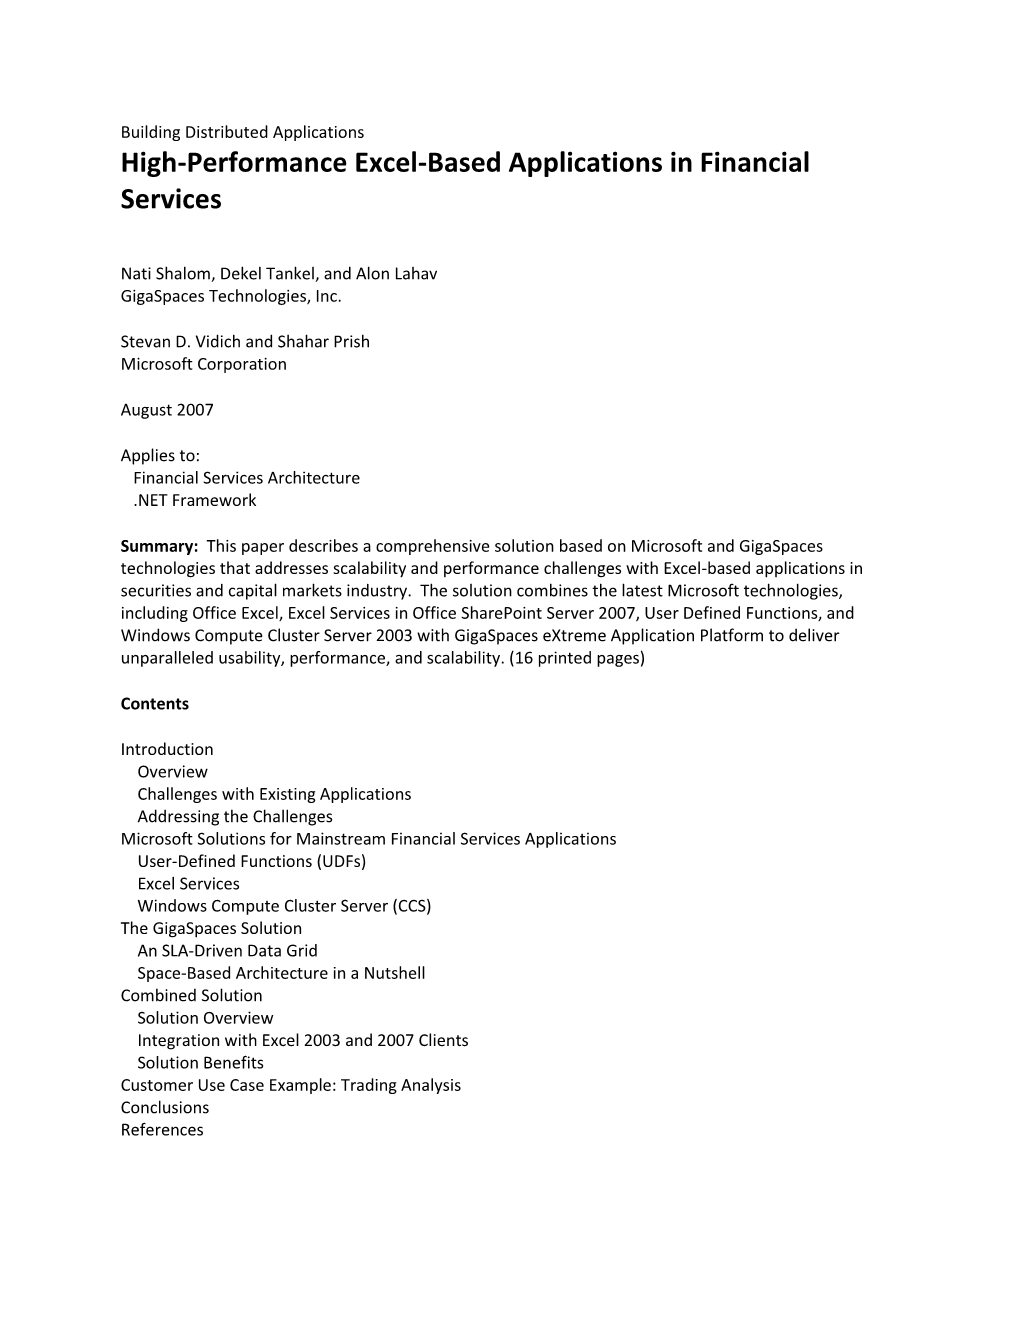 High-Performance Excel-Based Applications in Financial Services